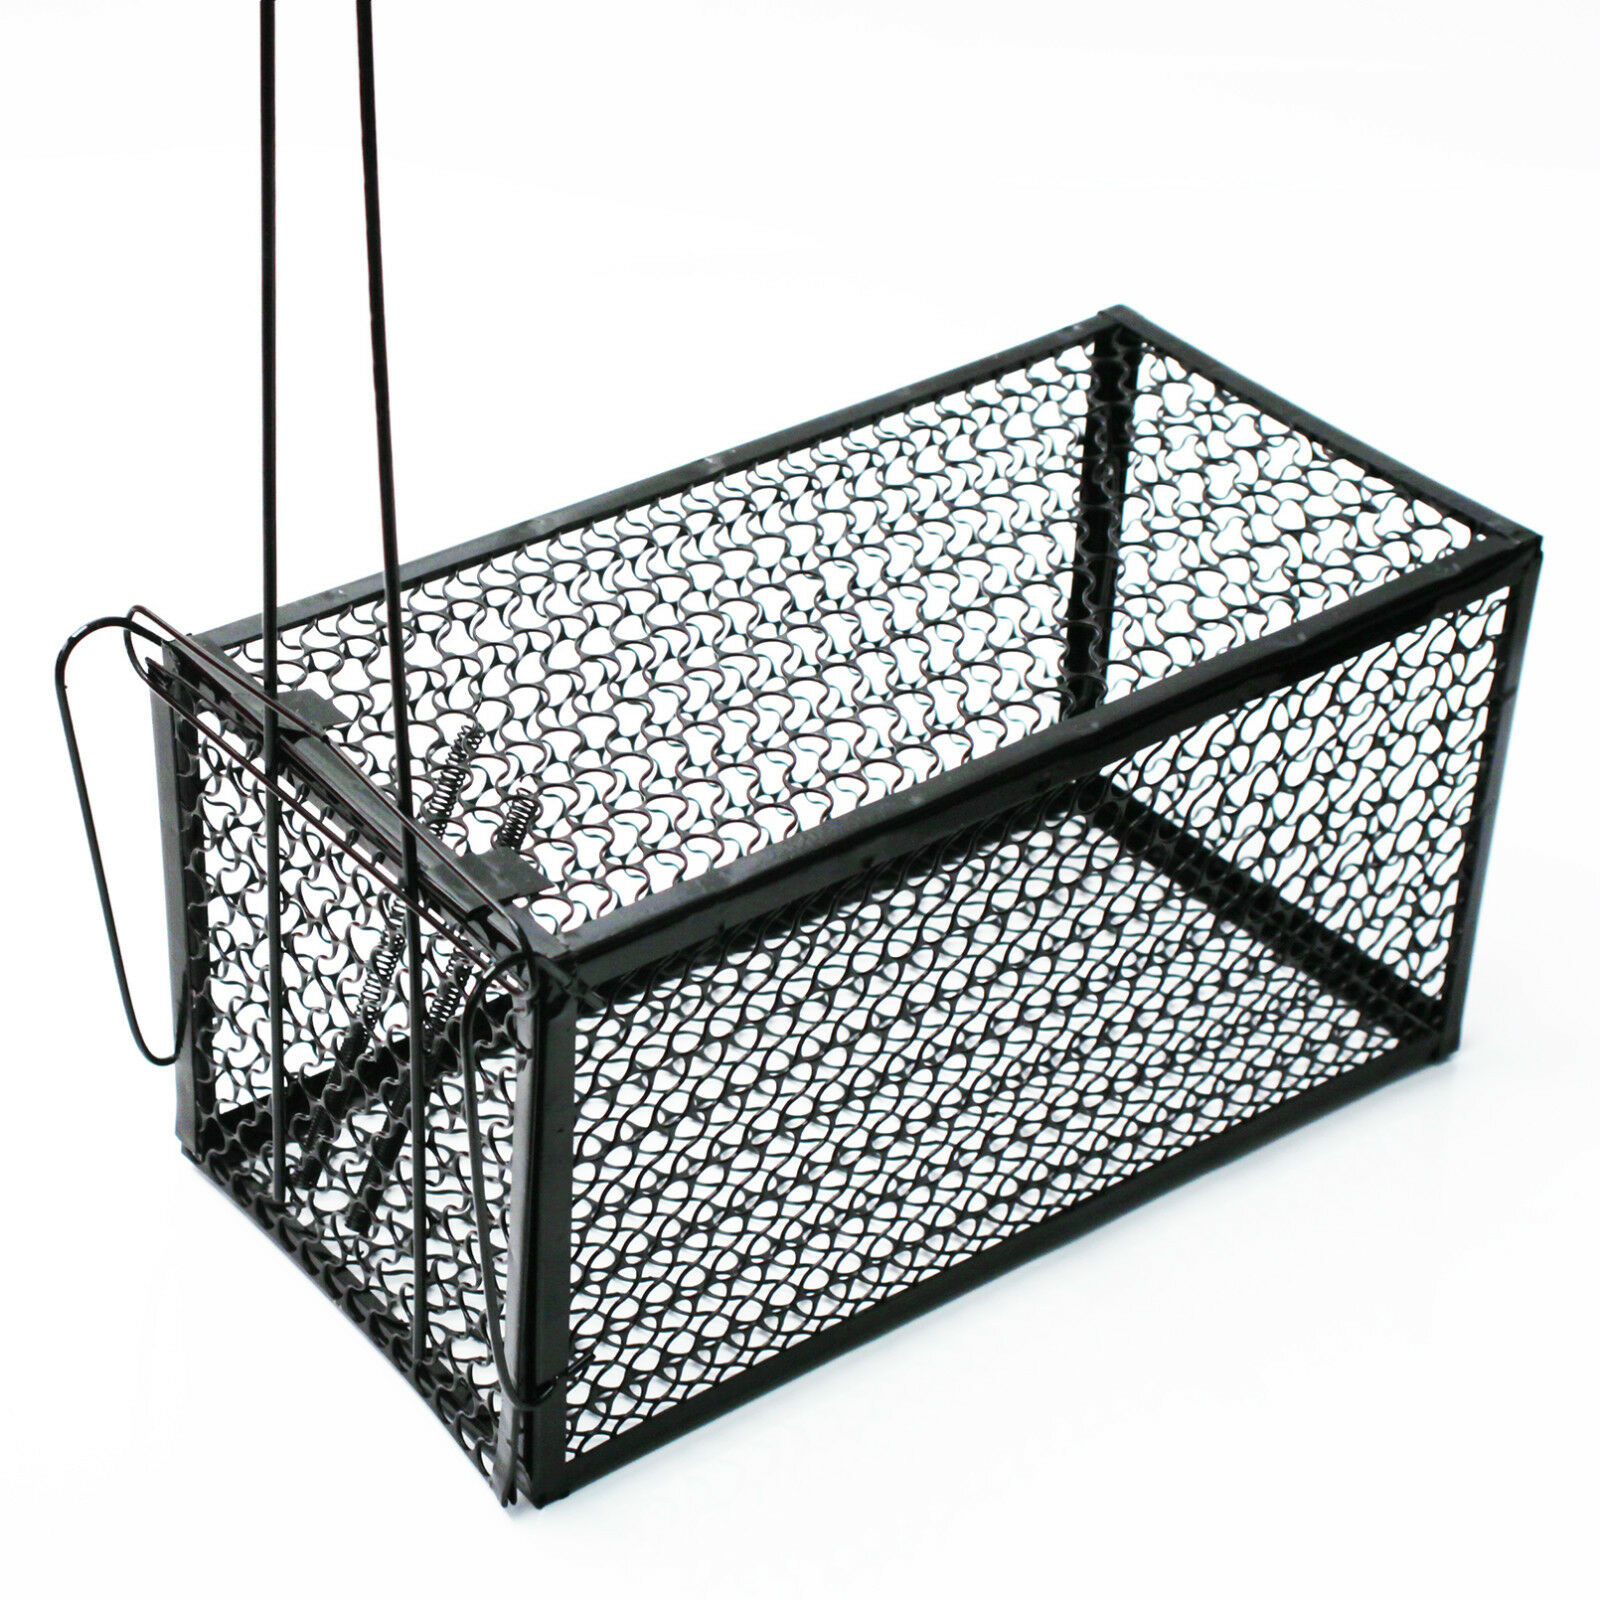 28X14x14cm Small Animal Live Hunting TRAP Catch Alive Survival Mouse cage